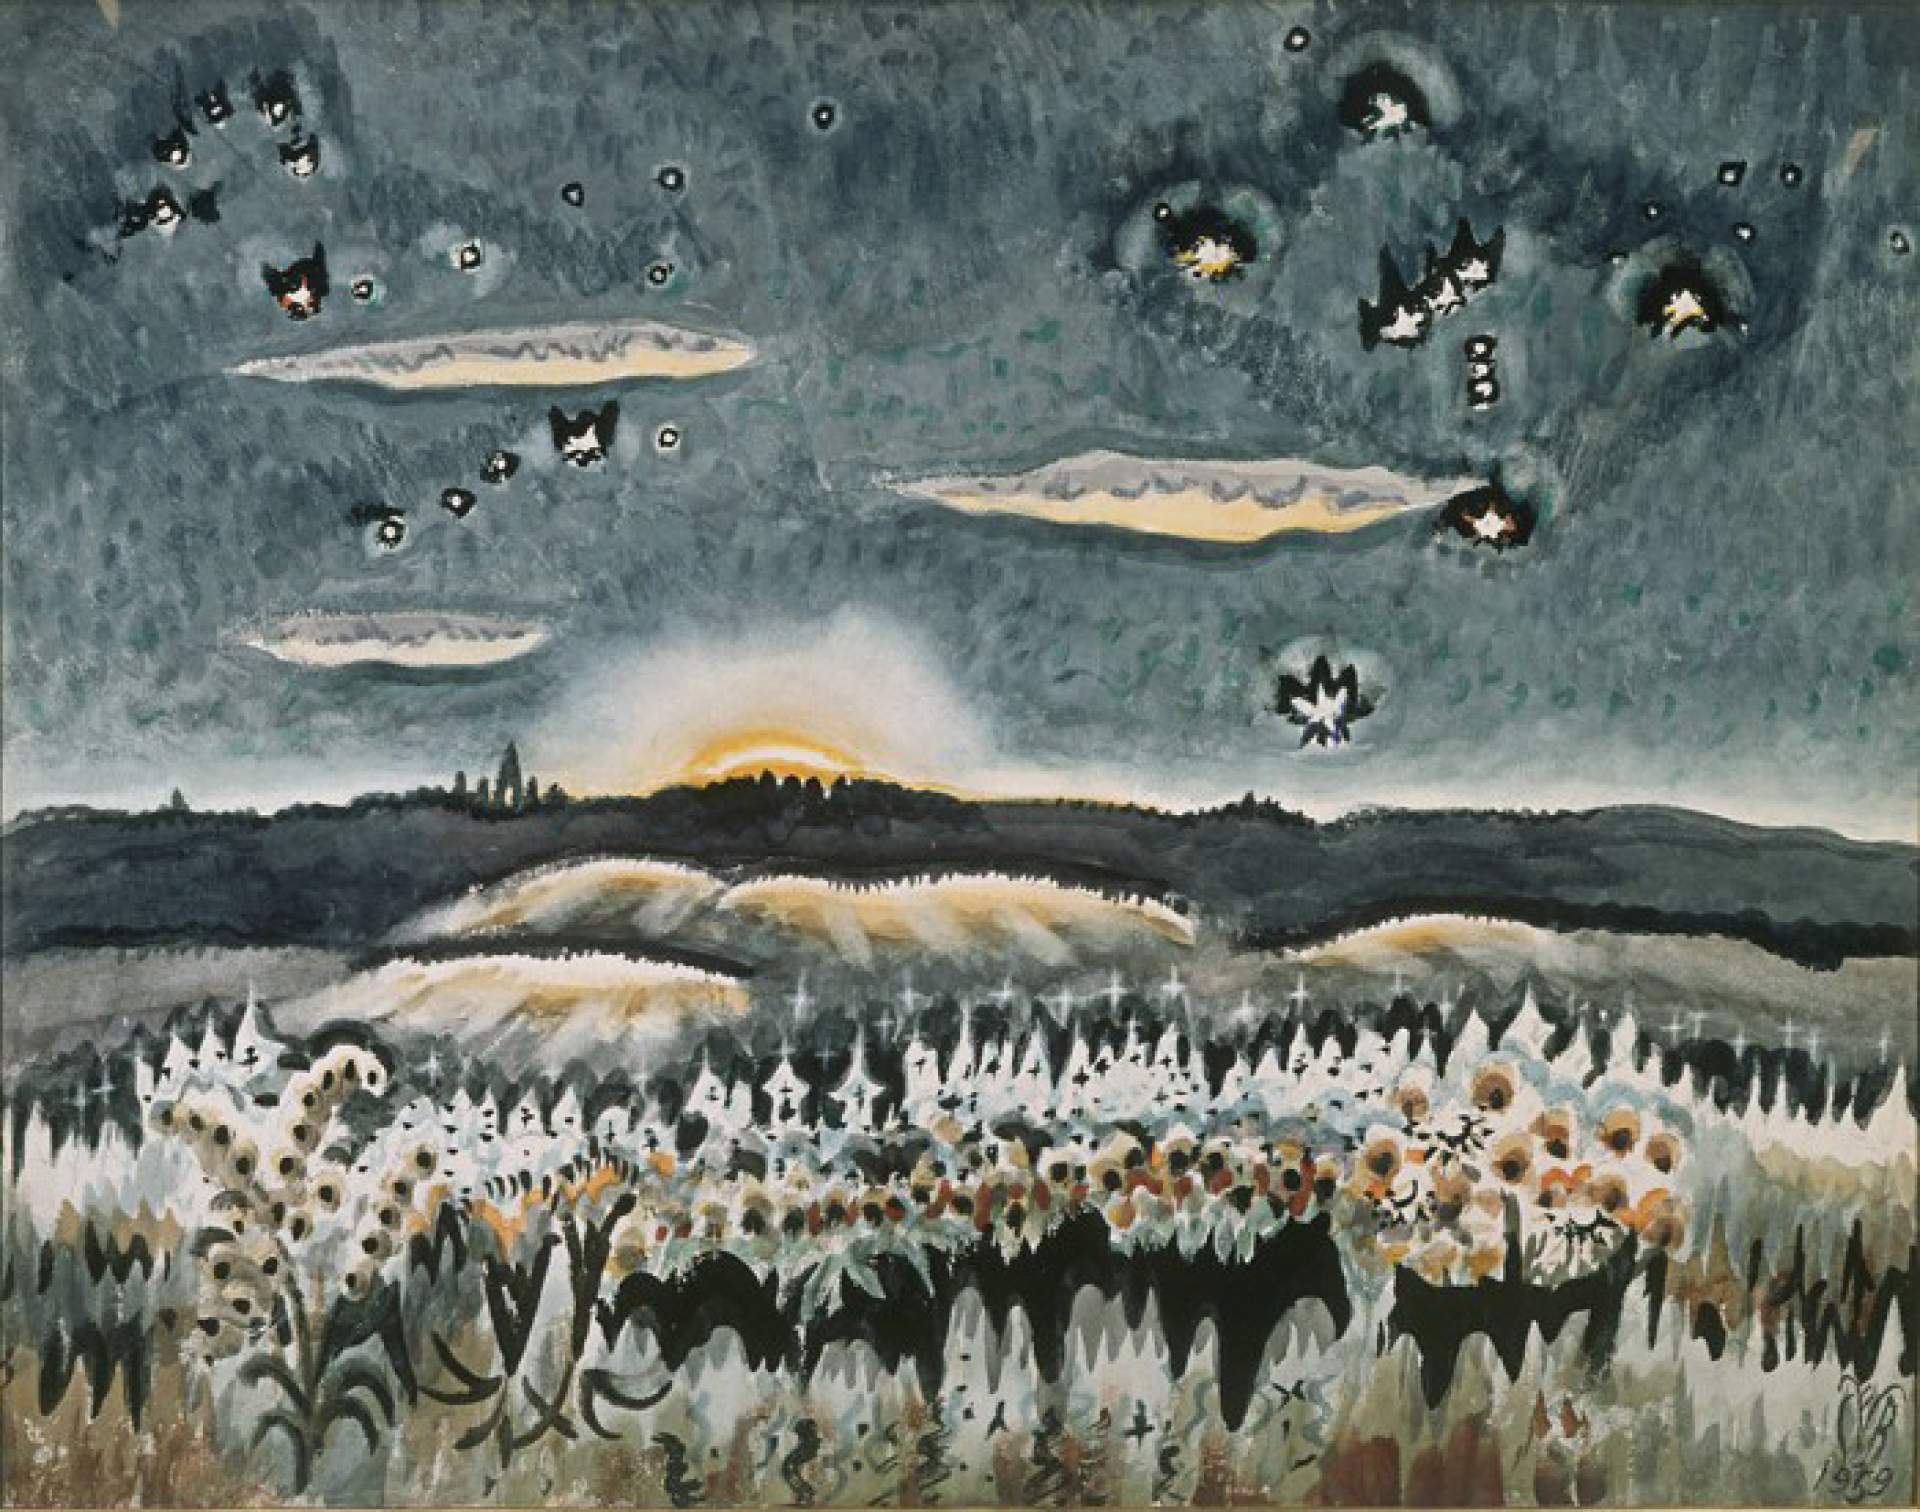 Charles E. Burchfield, letter to Dr. & Mrs. Theodor W. Braasch, December 30, 1959